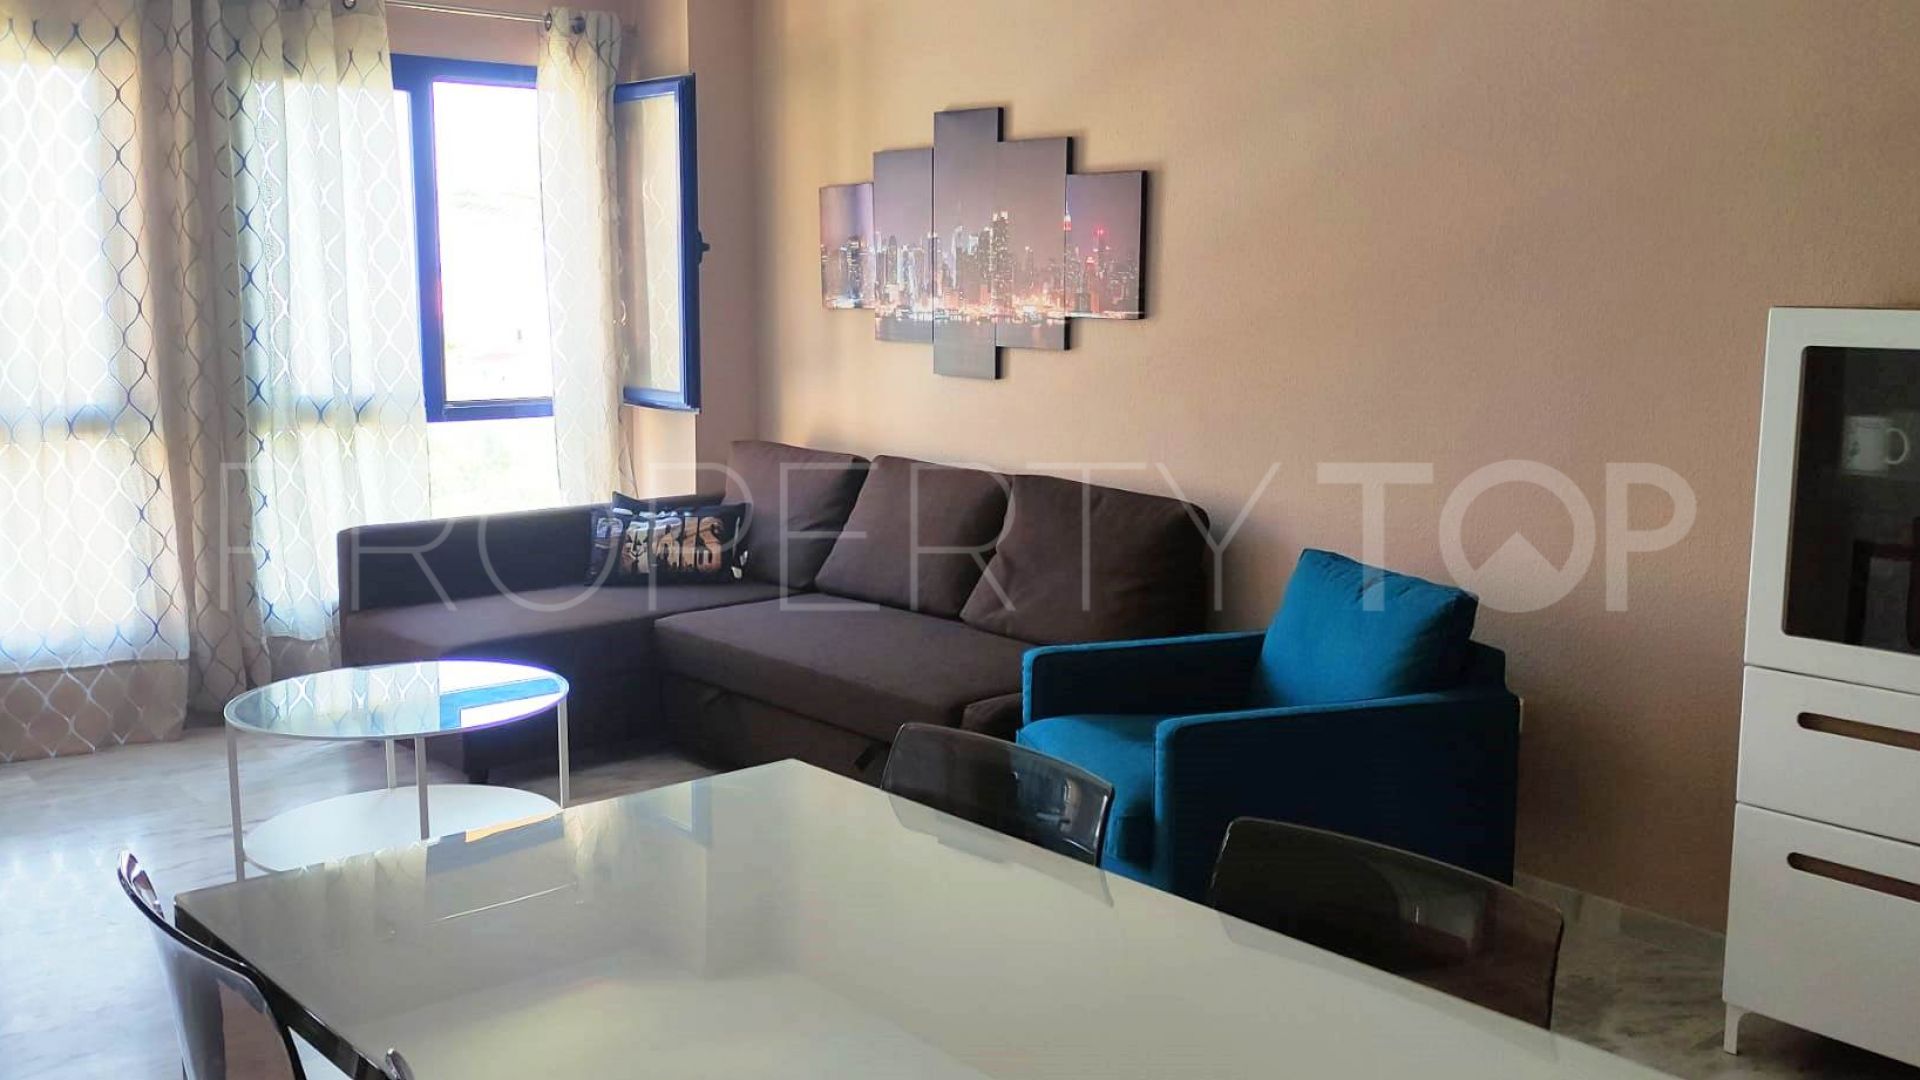 For sale Chullera 2 bedrooms apartment